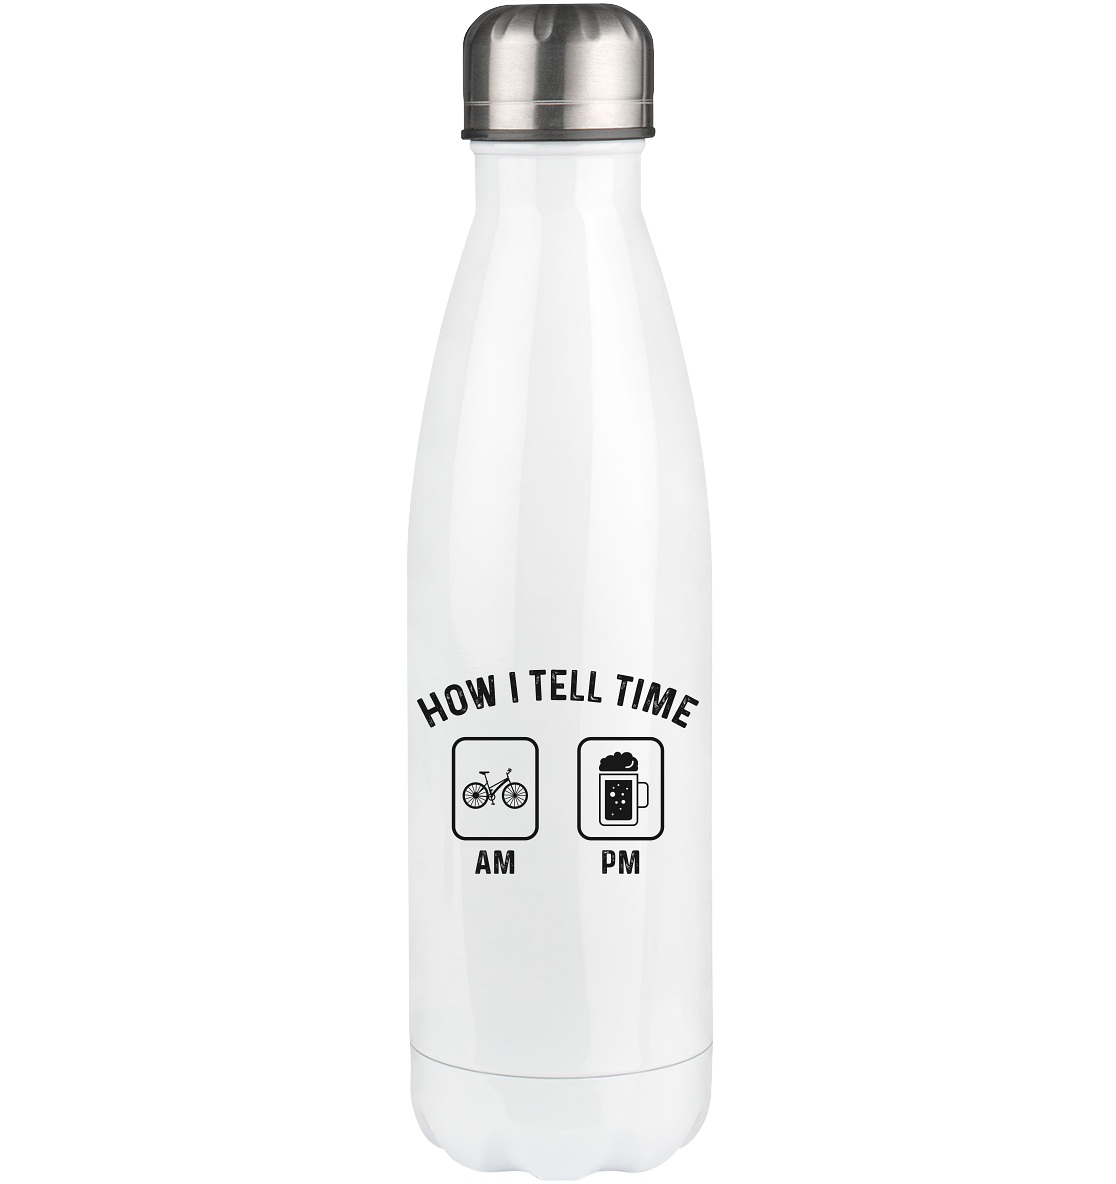 How I Tell Time Am Pm - Edelstahl Thermosflasche fahrrad 500ml